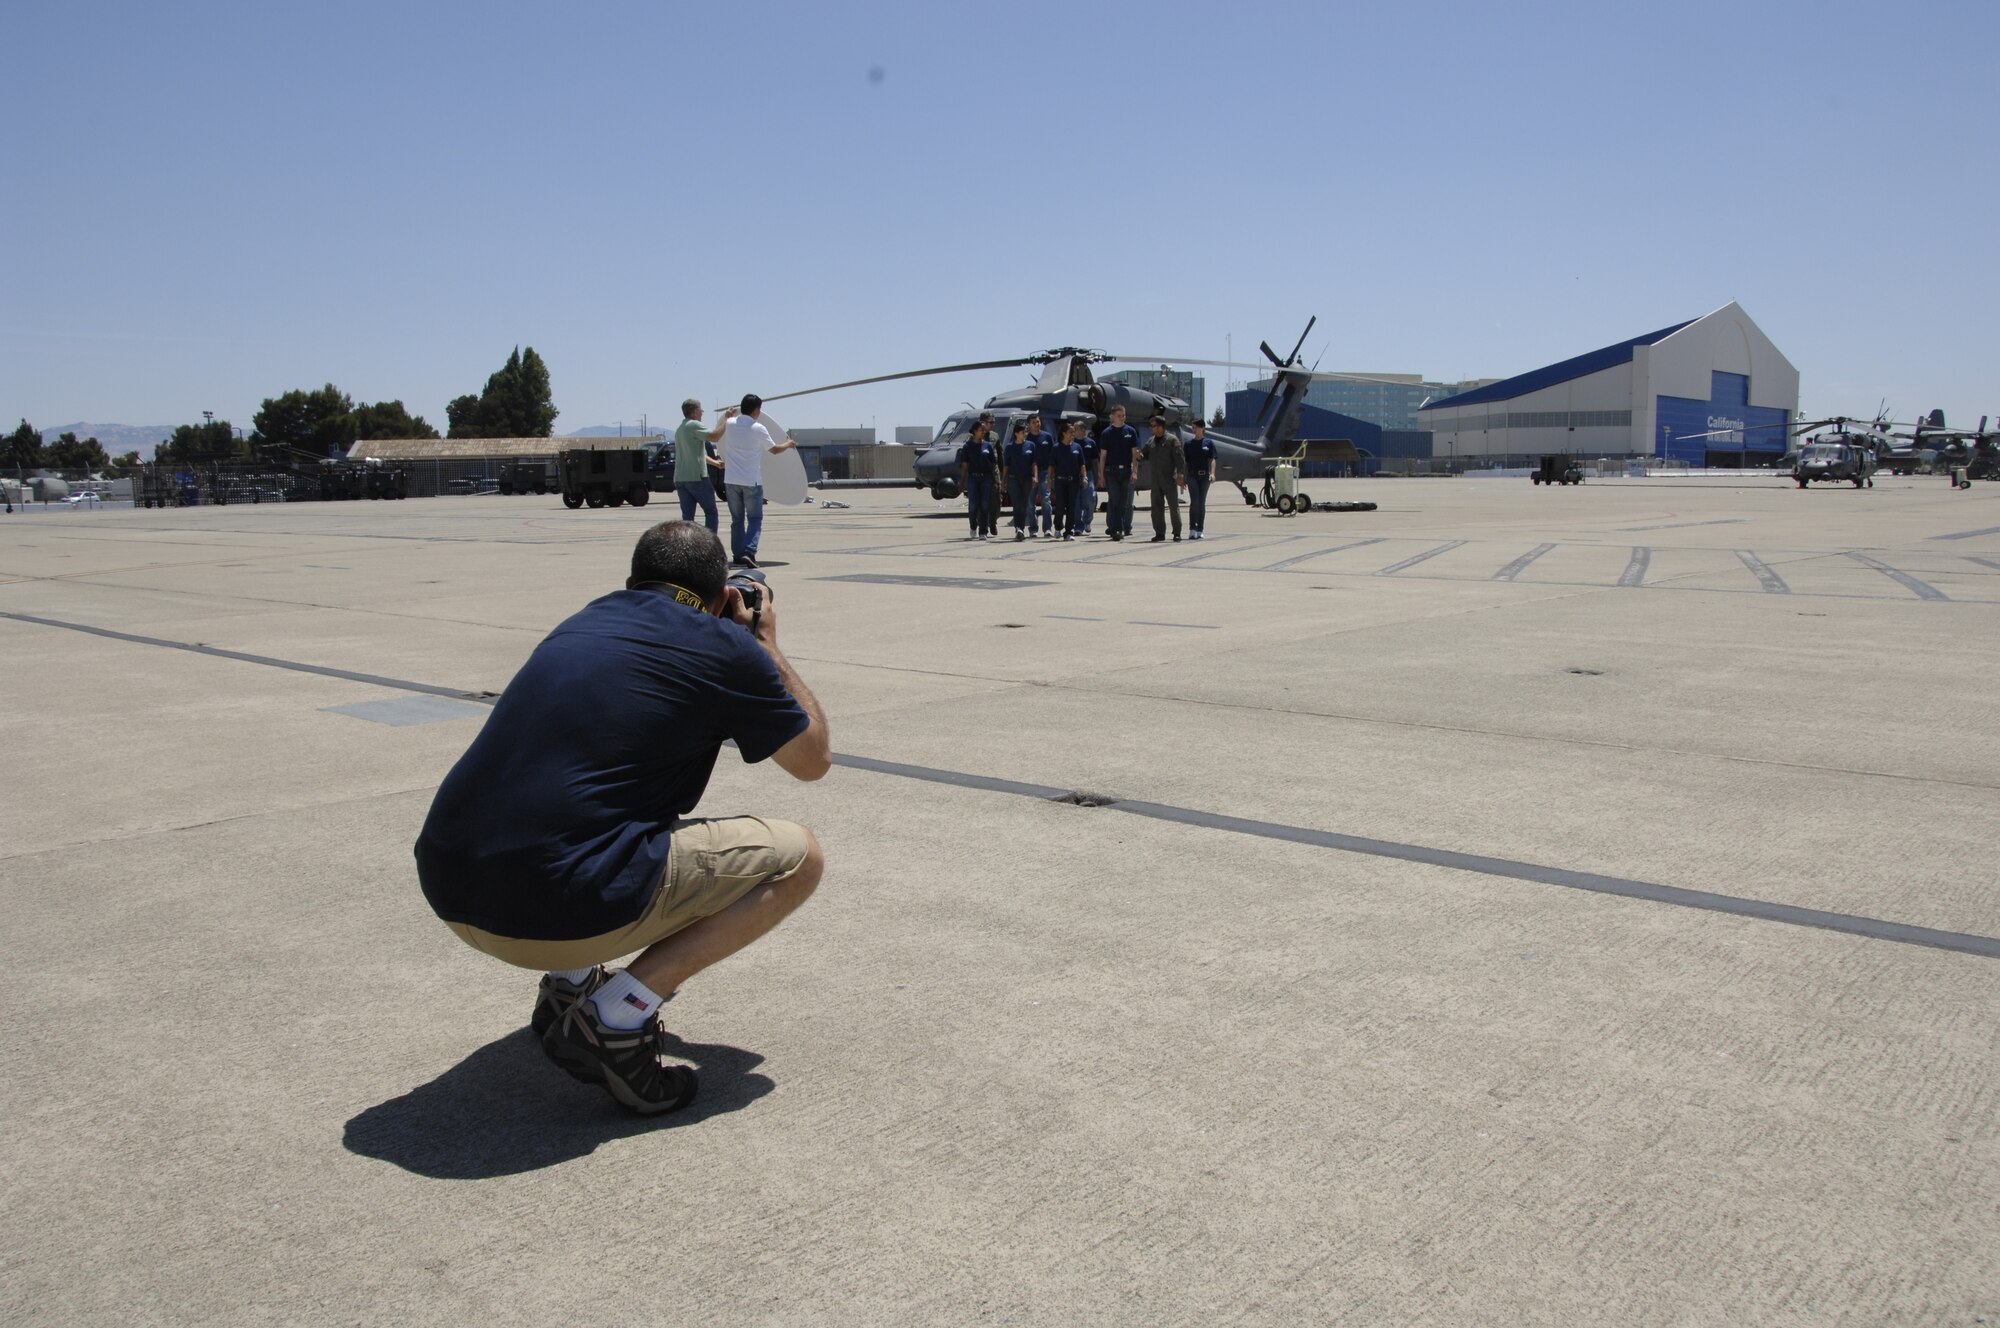 Master Sgt. Rob Trubia, superintendent of the Air National Guard Advertising and Marketing Creative Branch, takes photos of the 129th Rescue Wing student flight during a photo shoot for the redesign of GoANG.com at Moffett Federal Airfield, Calif., Aug. 1, 2009. (Air National Guard photo by Tech. Sgt. Ray Aquino)